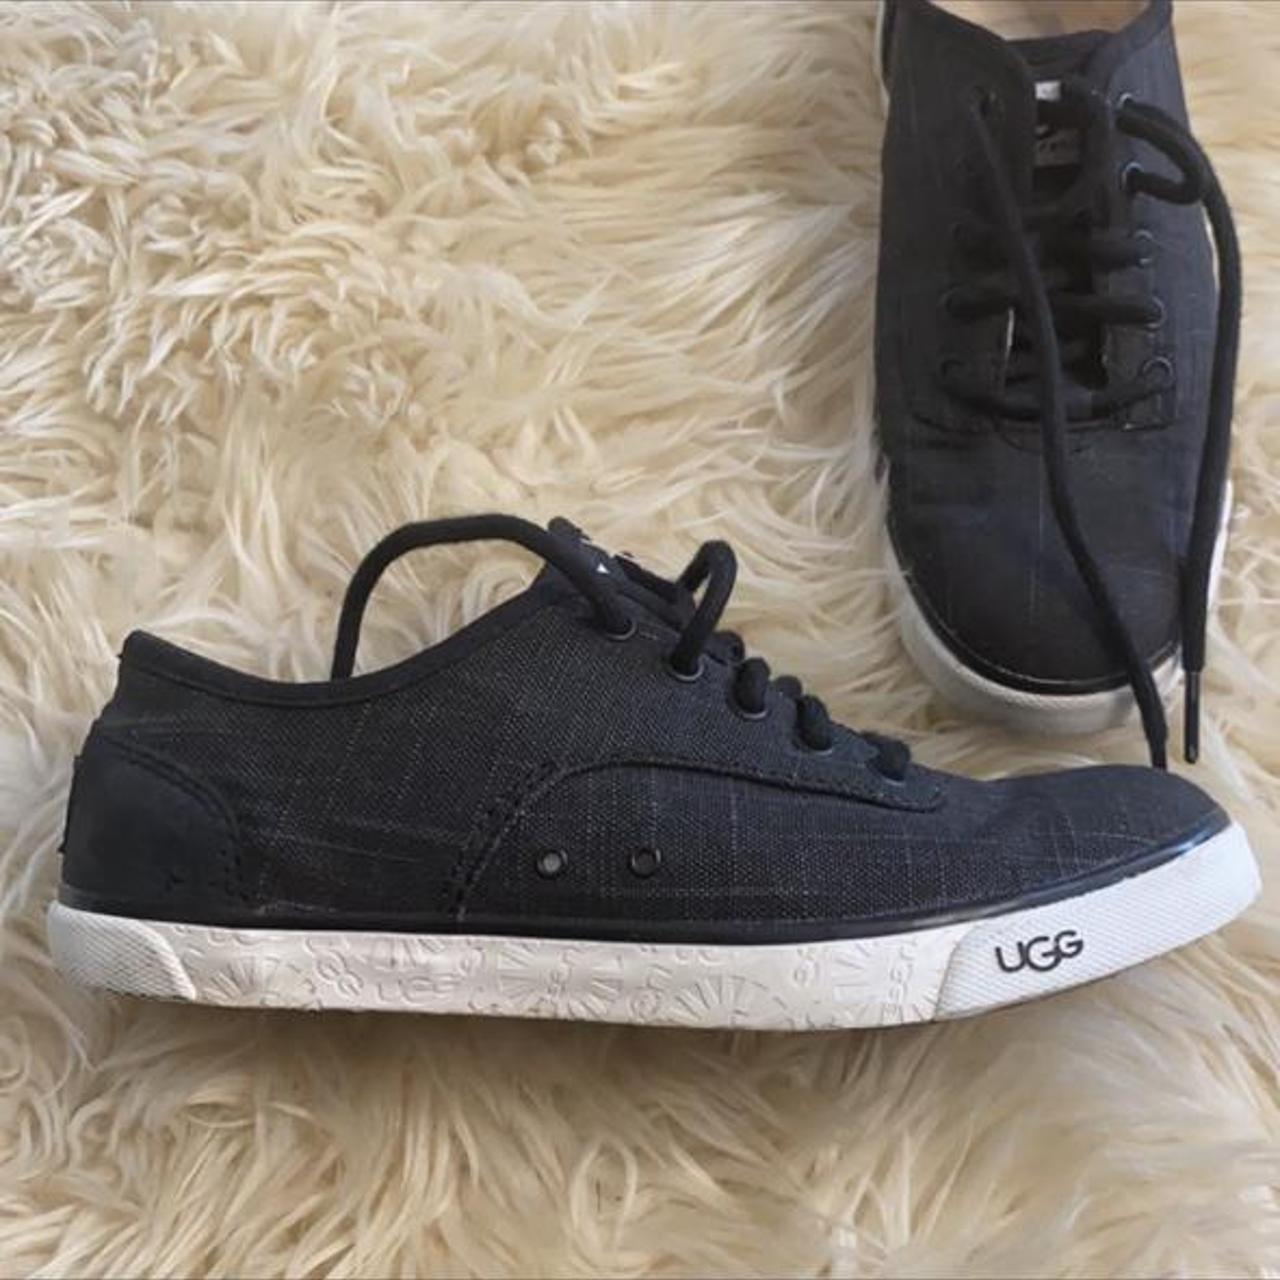 UGG Women's Black and Grey Trainers